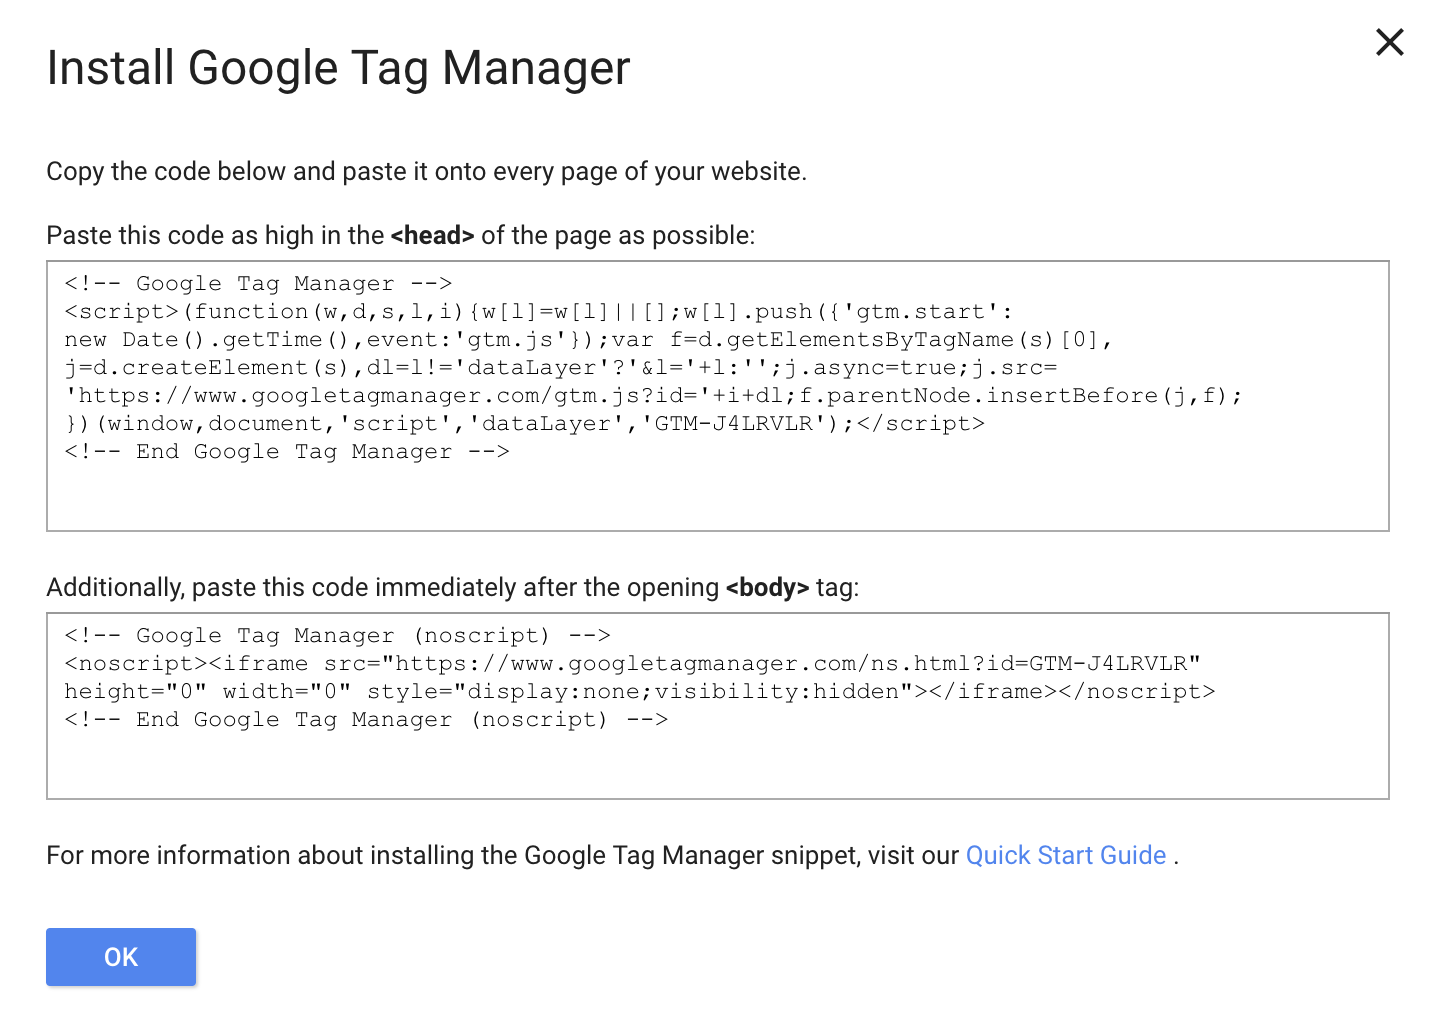 Google Tag code instructions and codes